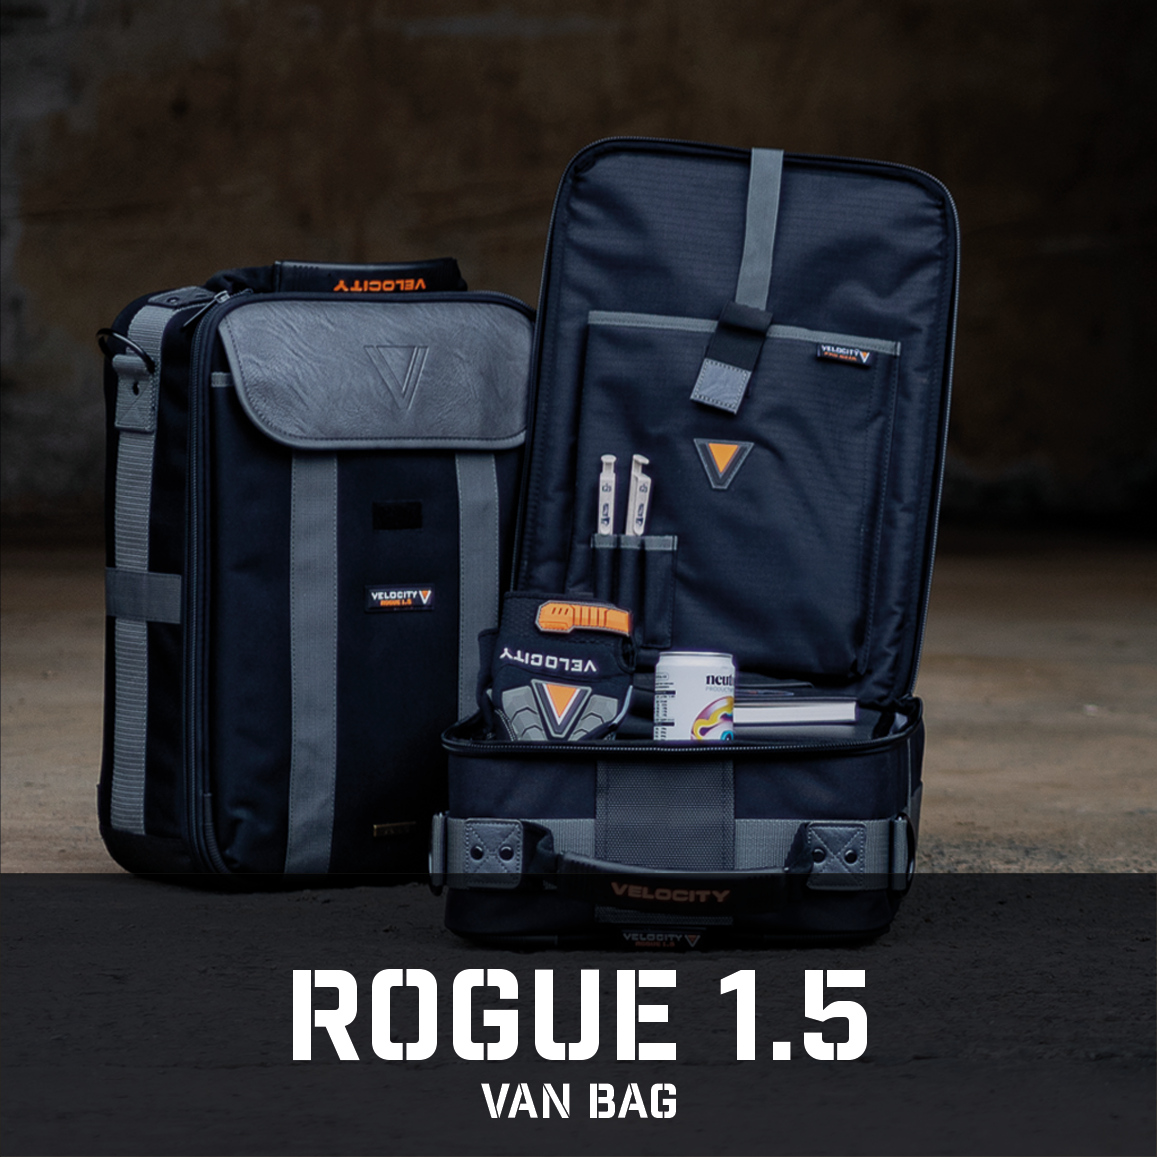 Two Rogue 1.5 Van Bags, one open & one closed, showing use case with white text